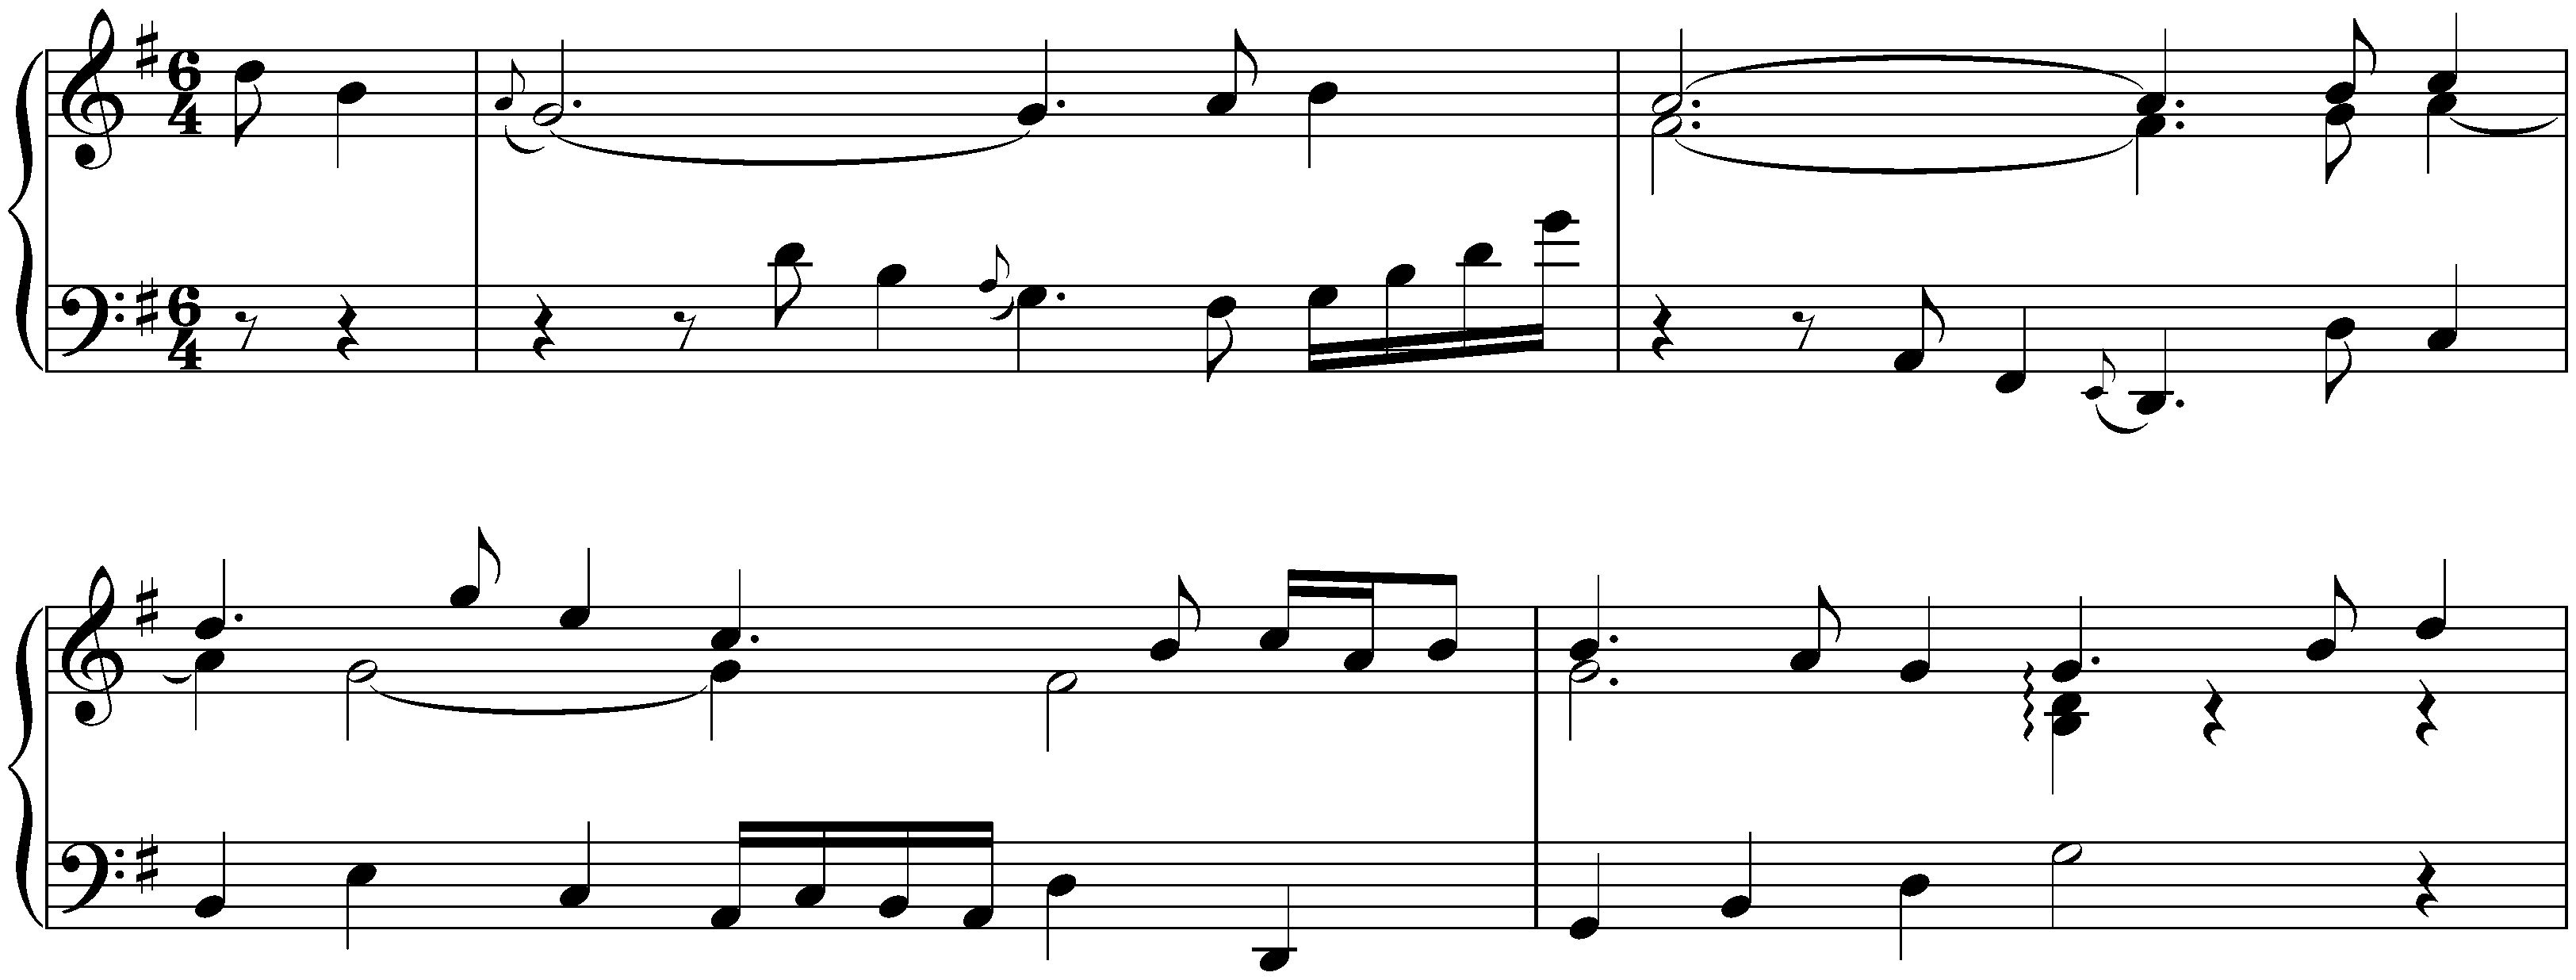 French Suite no. 5 in G major, BWV 816; 6. Loure